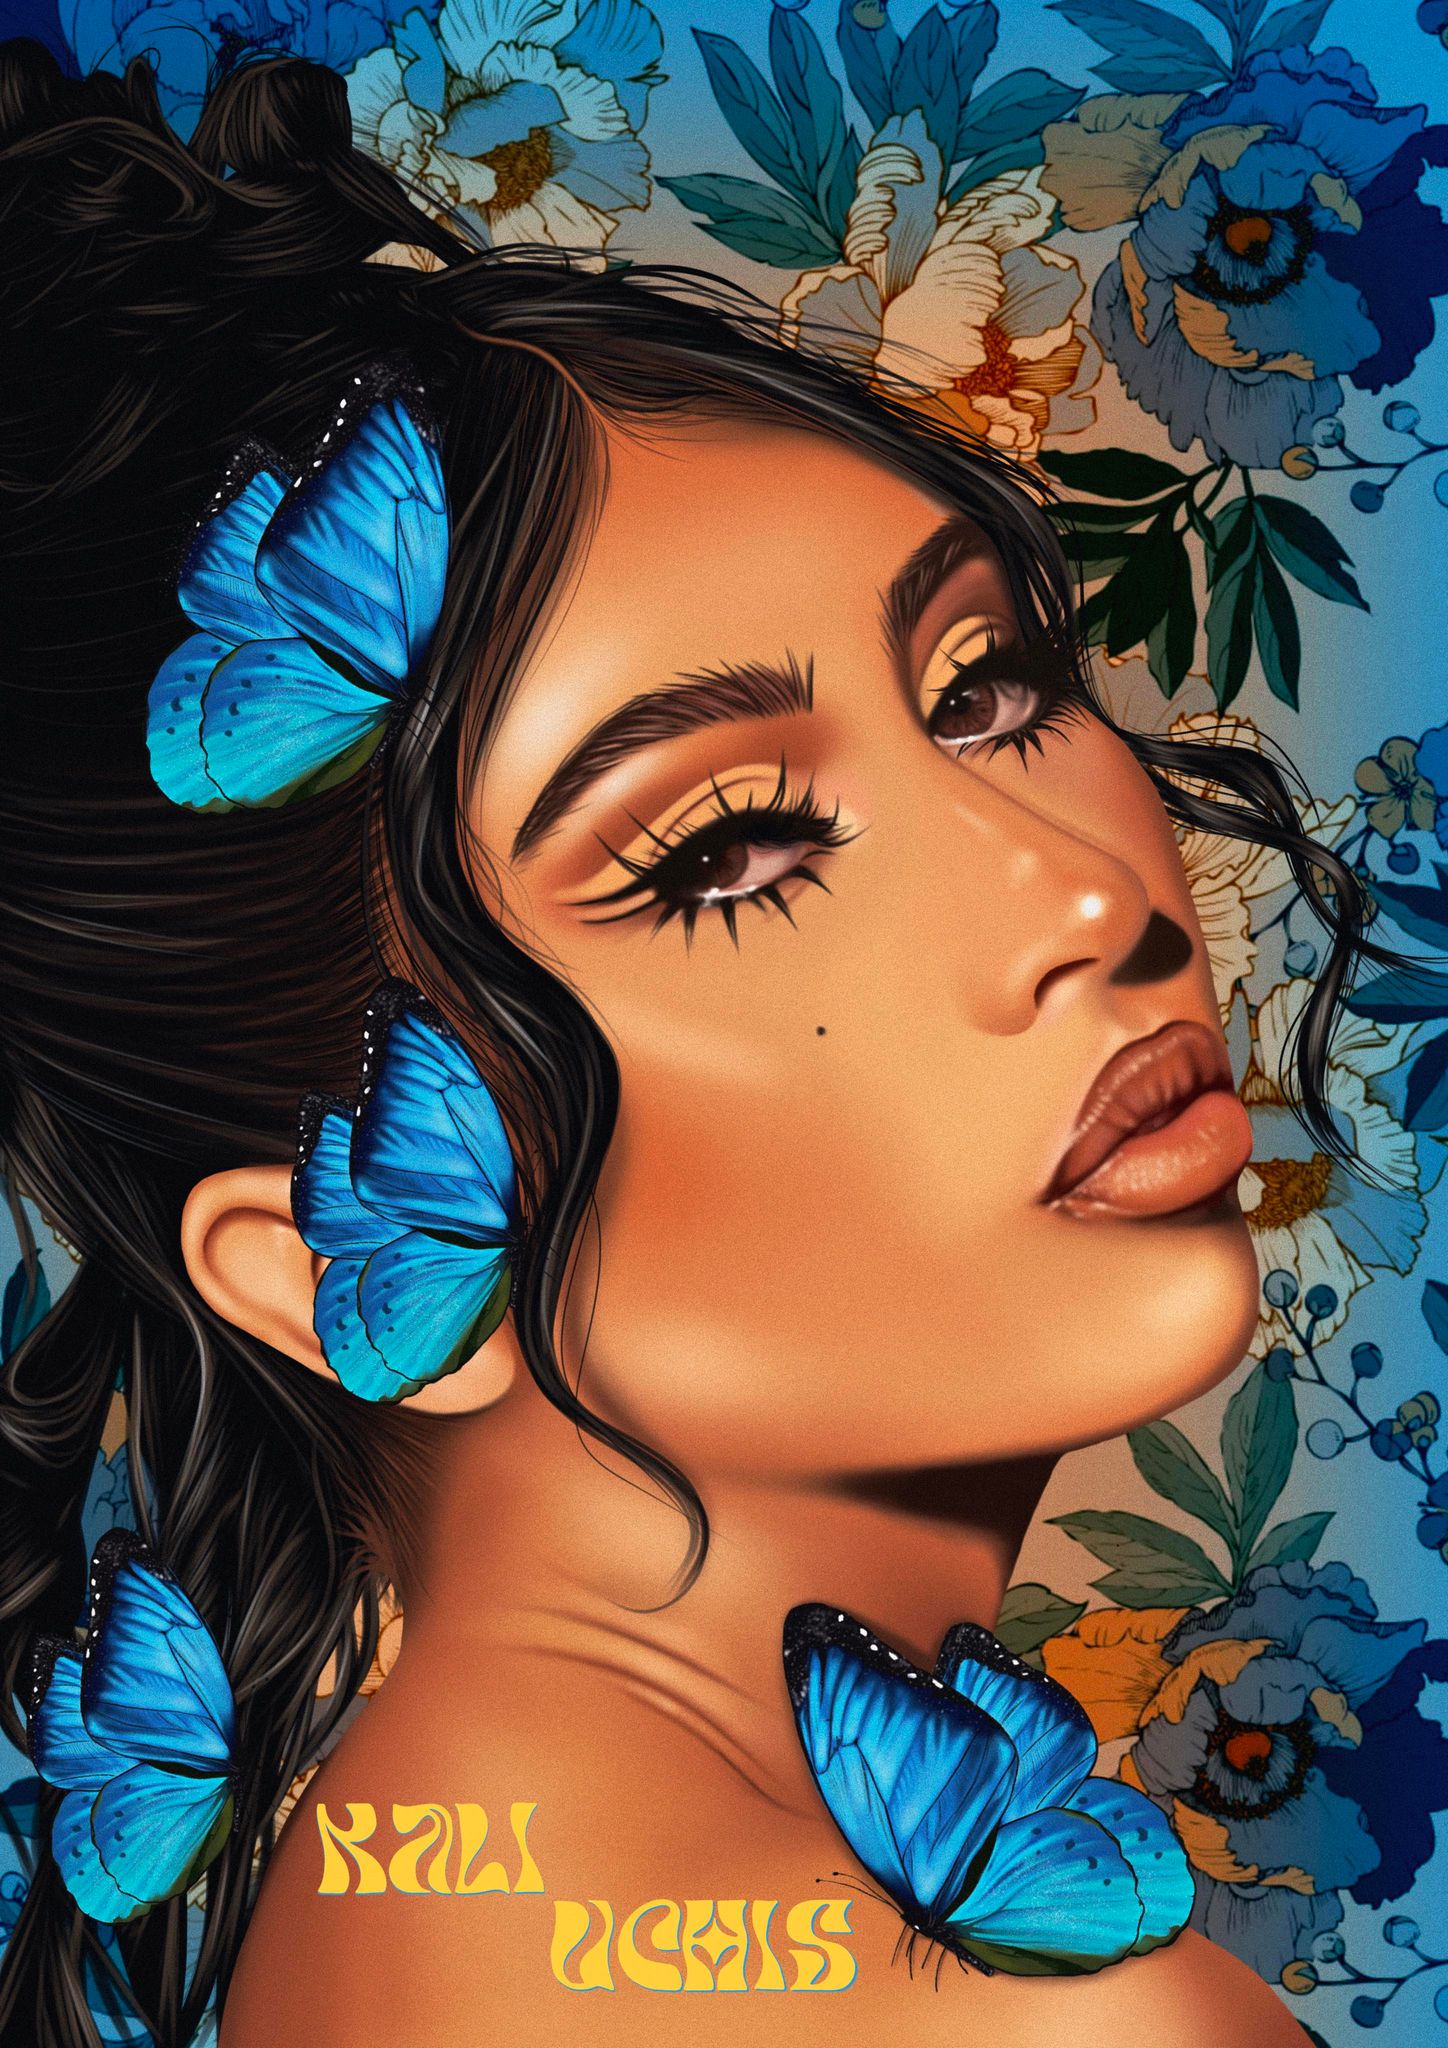 Digital portrait poster of singer Kali Uchis. Blue butterflies, yellow text with the singer's name in the foreground and flowers in the background.